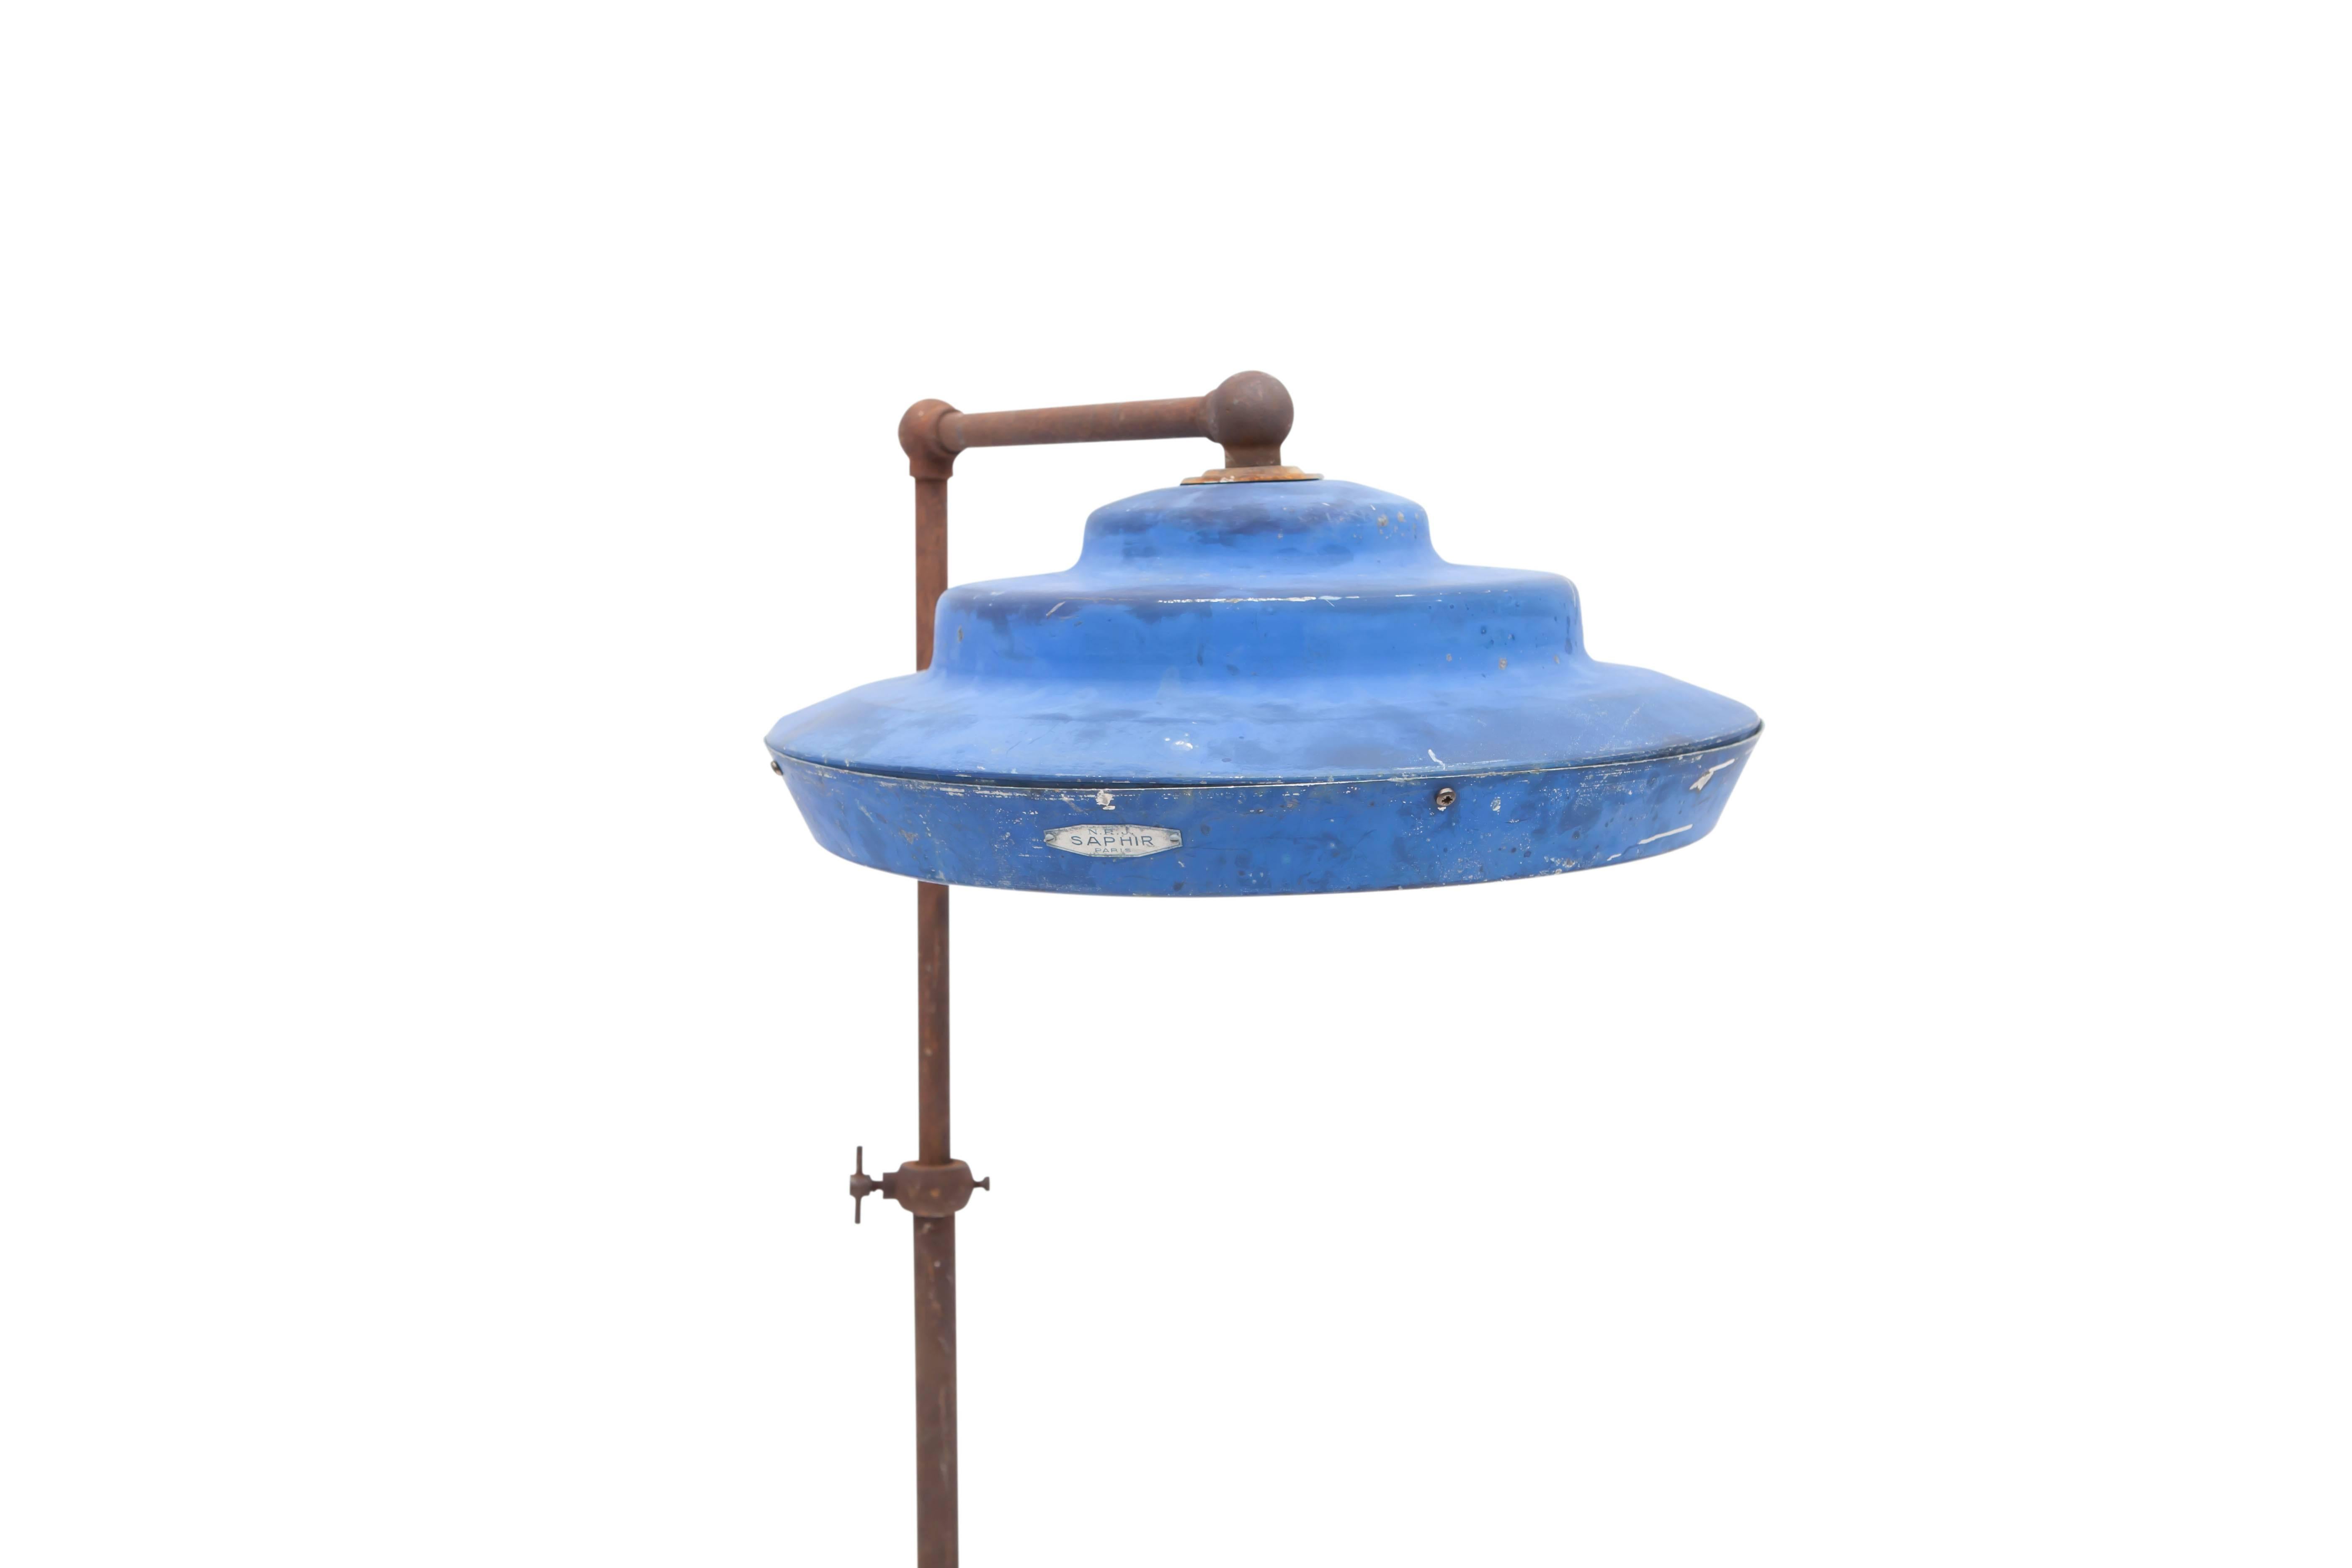 Industrial floor lamp Saphir Paris with original blue shade.
Mounted on Tripod iron base.
An Early 20th century 'machine age' piece in original condition.
Great patina
Measure: H 142 cm x D 53 cm x W 43 cm 
